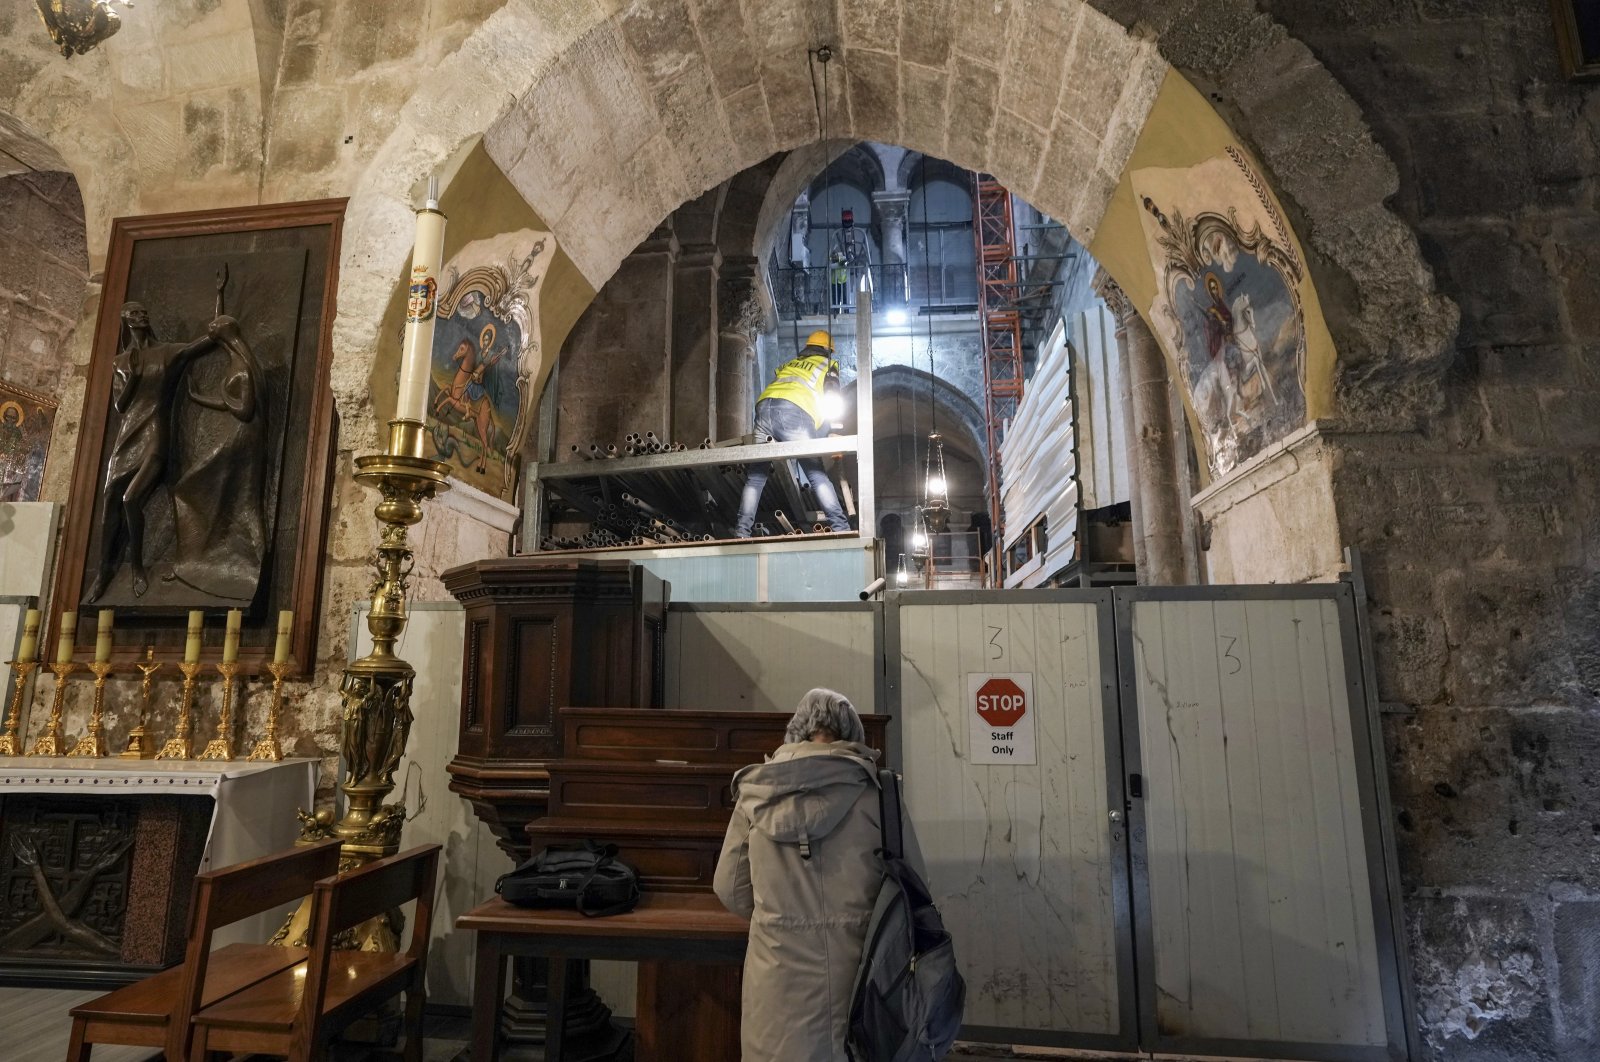 A member of the restoration team works on the floor of the Church of the Holy Sepulchre, where many Christians believe Jesus was crucified, buried and rose from the dead, in the Old City of Jerusalem, Palestine, March 17, 2022. (AP Photo)